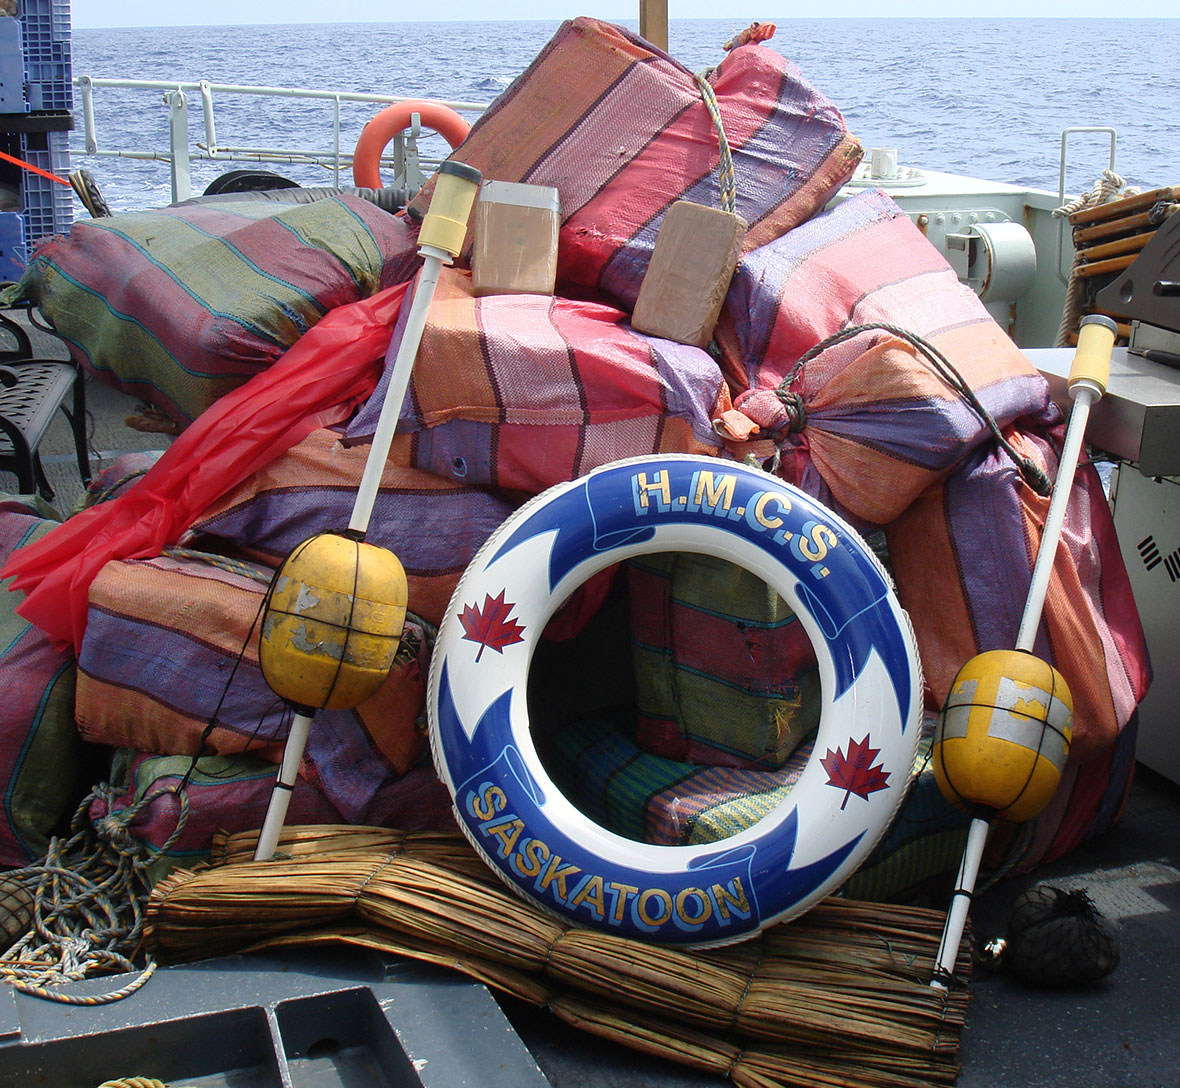 Her Majesty's Canadian Ship (HMCS) Saskatoon and its embarked United States Coast Guard Law Enforcement Detachment seize 16 bales (640 kg) of cocaine from the Eastern Pacific Ocean during Operation CARIBBE on March 26, 2016.